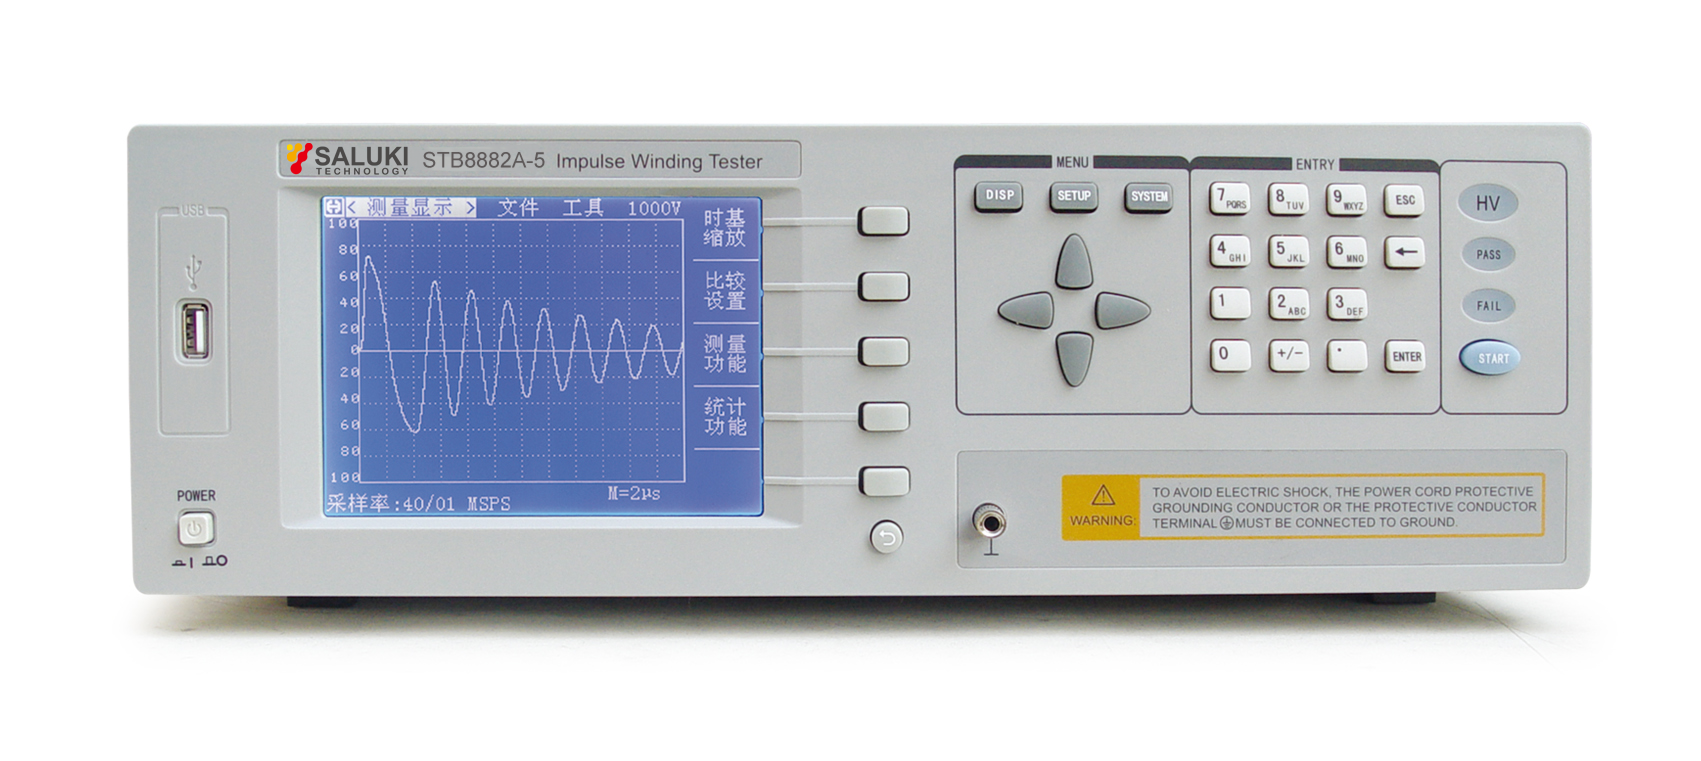 STB8882A Series Impulse Winding Tester